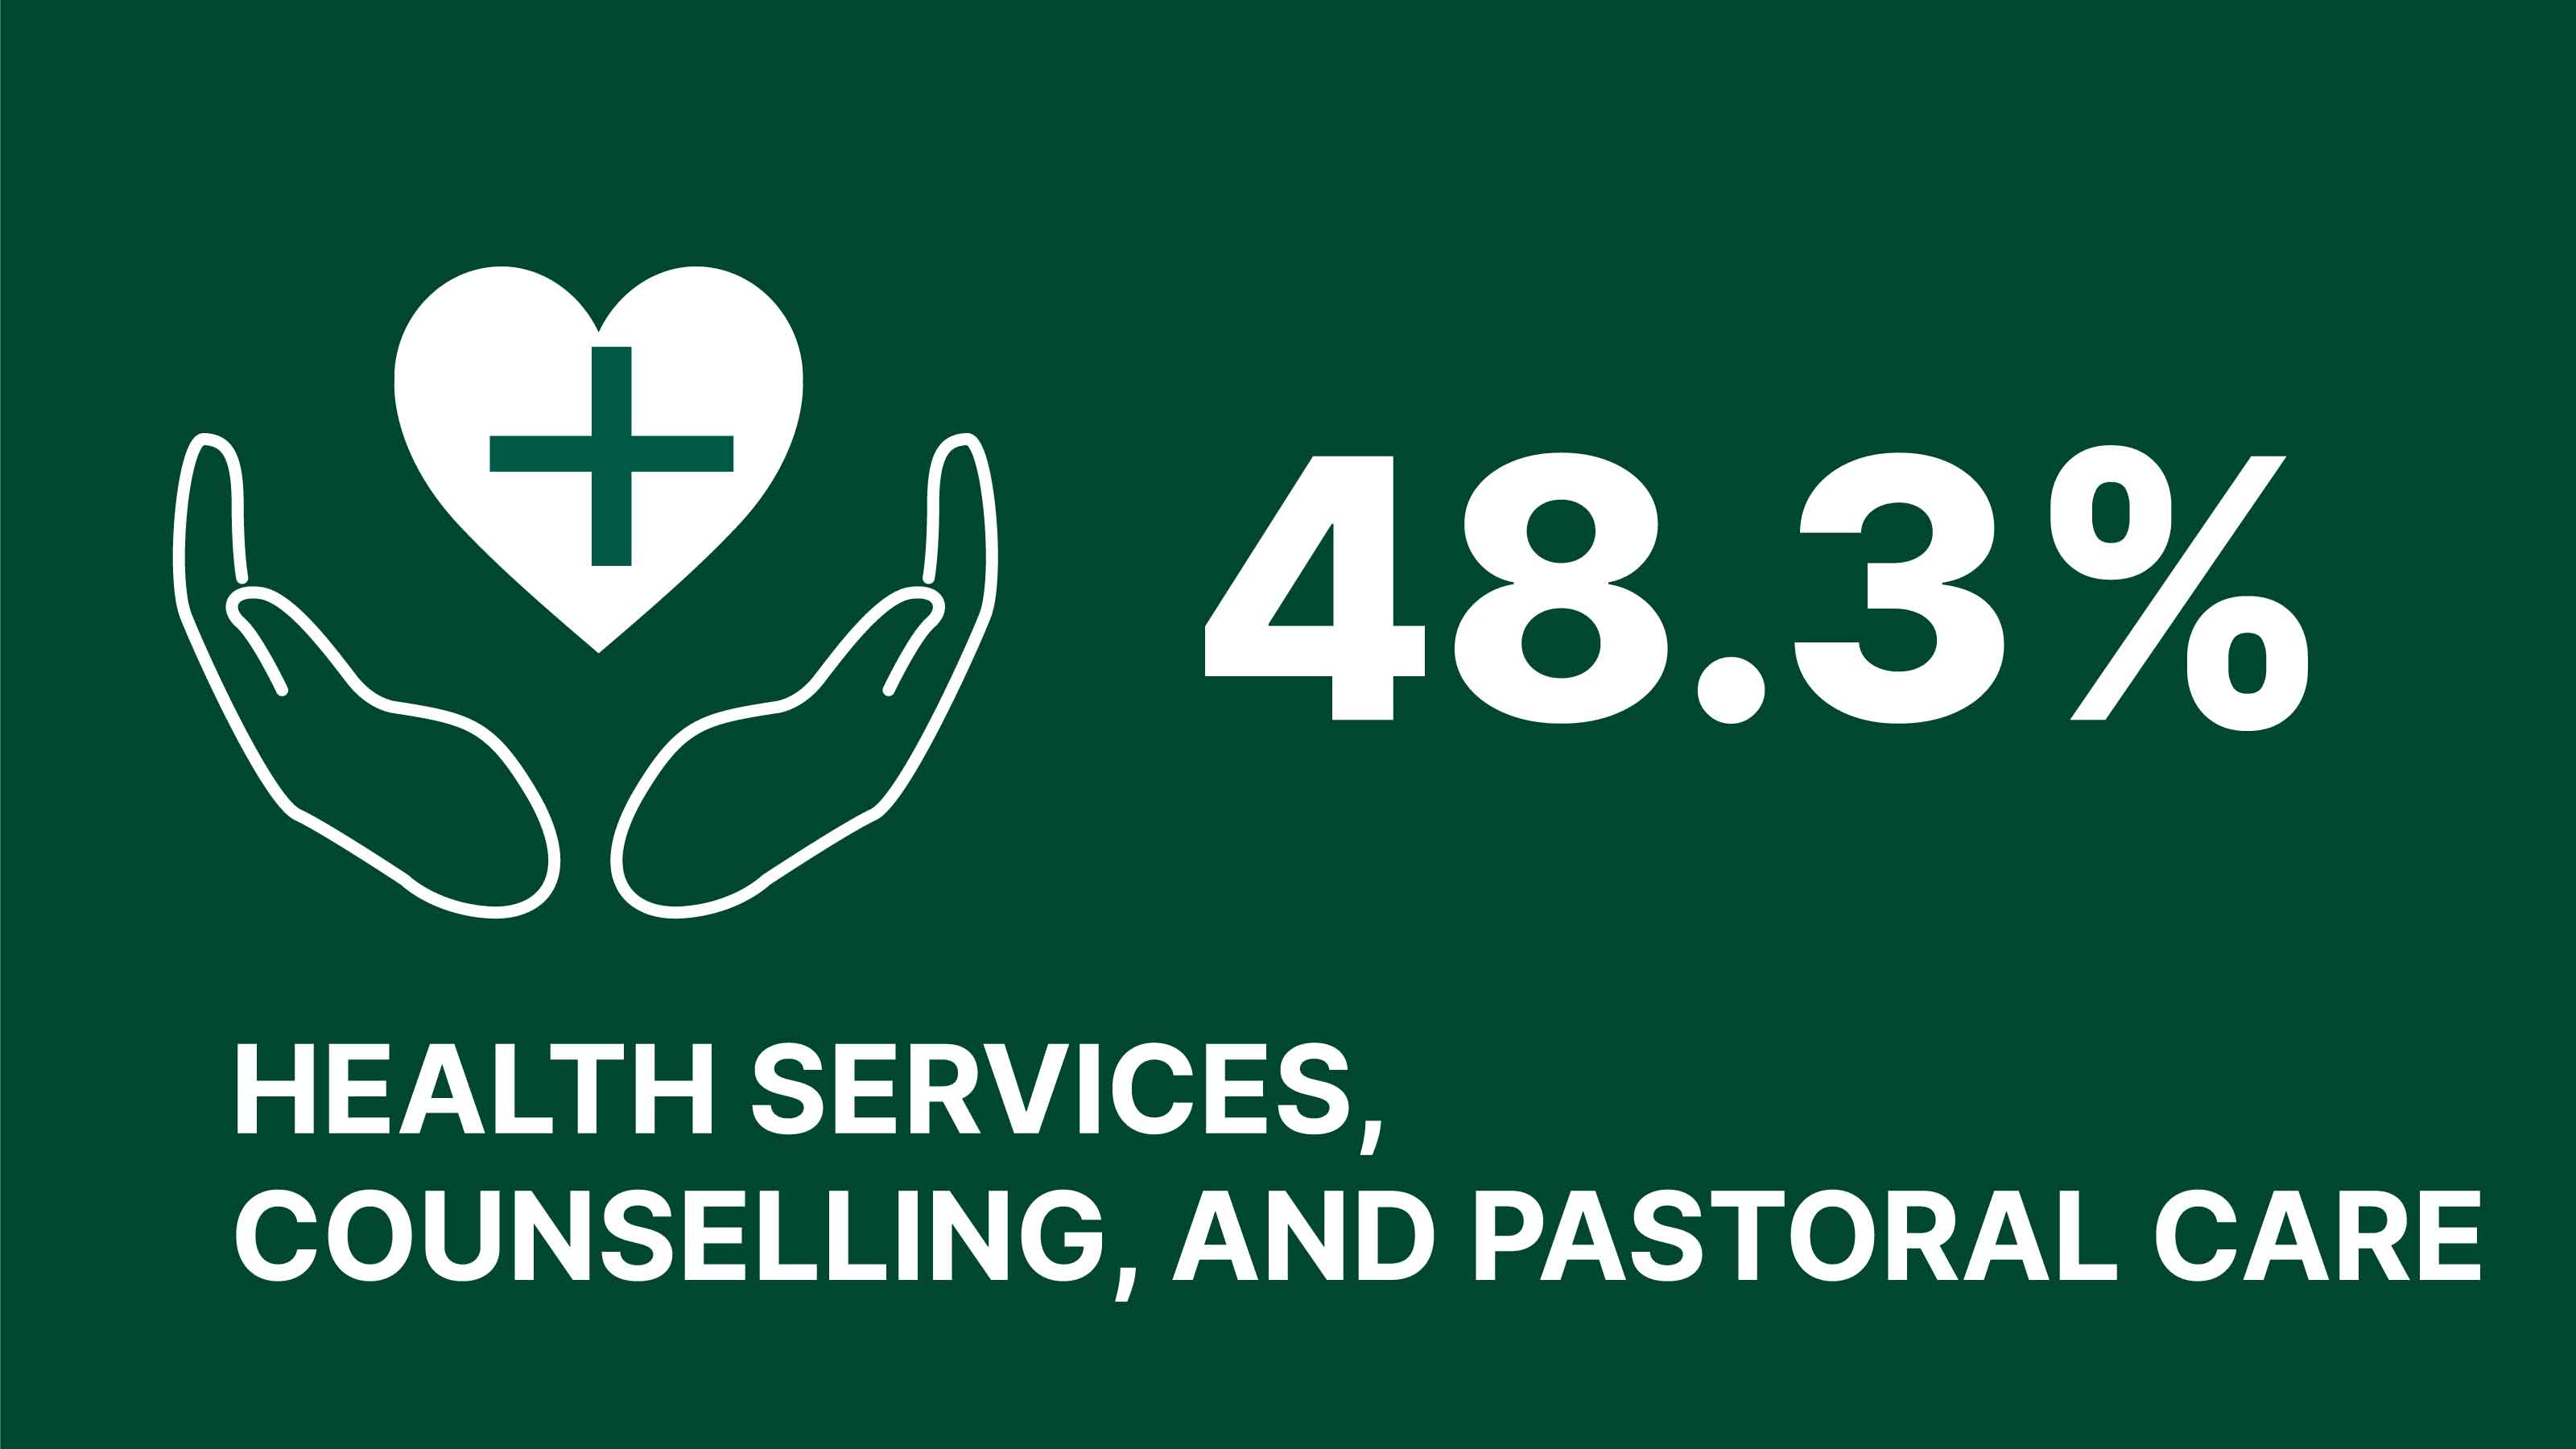 Infographic showing 48.3% of the levy goes to health services, counselling and pastoral care